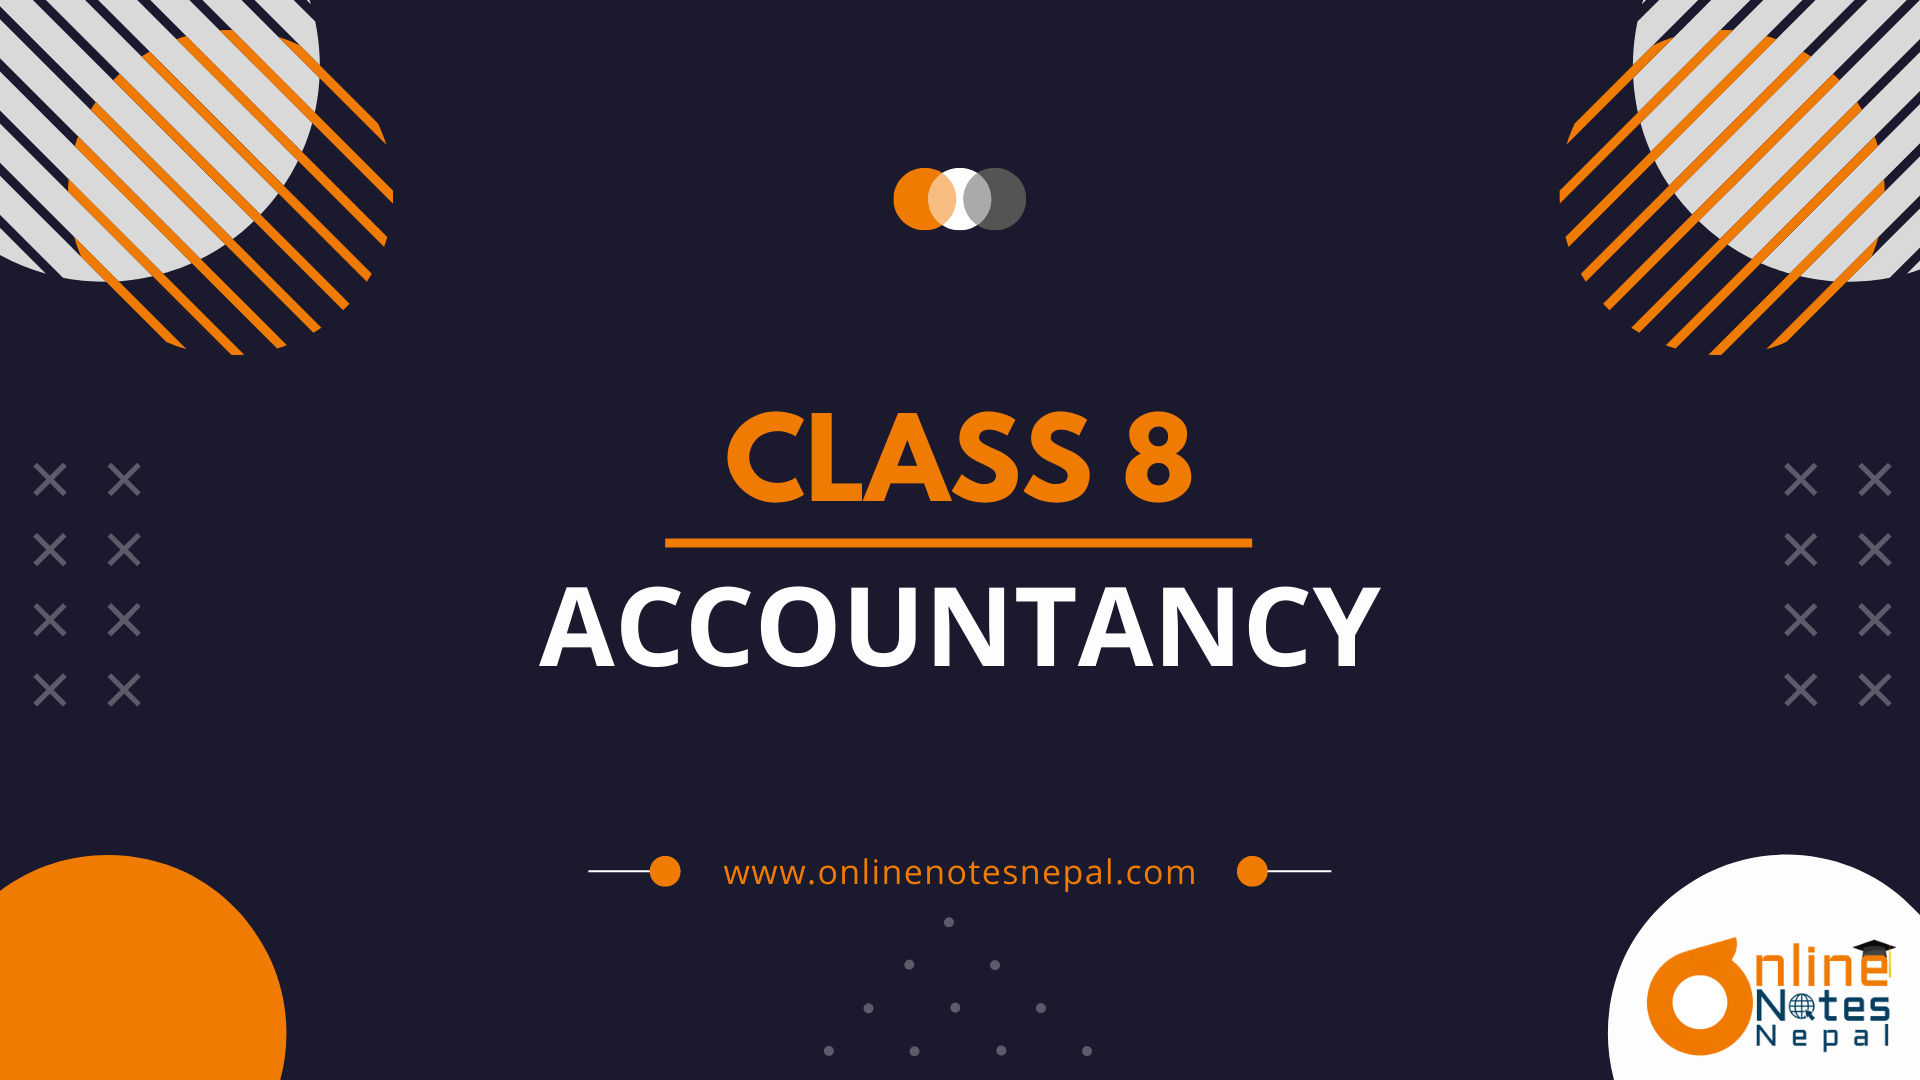 Accountancy of Grade-8, Reference Note